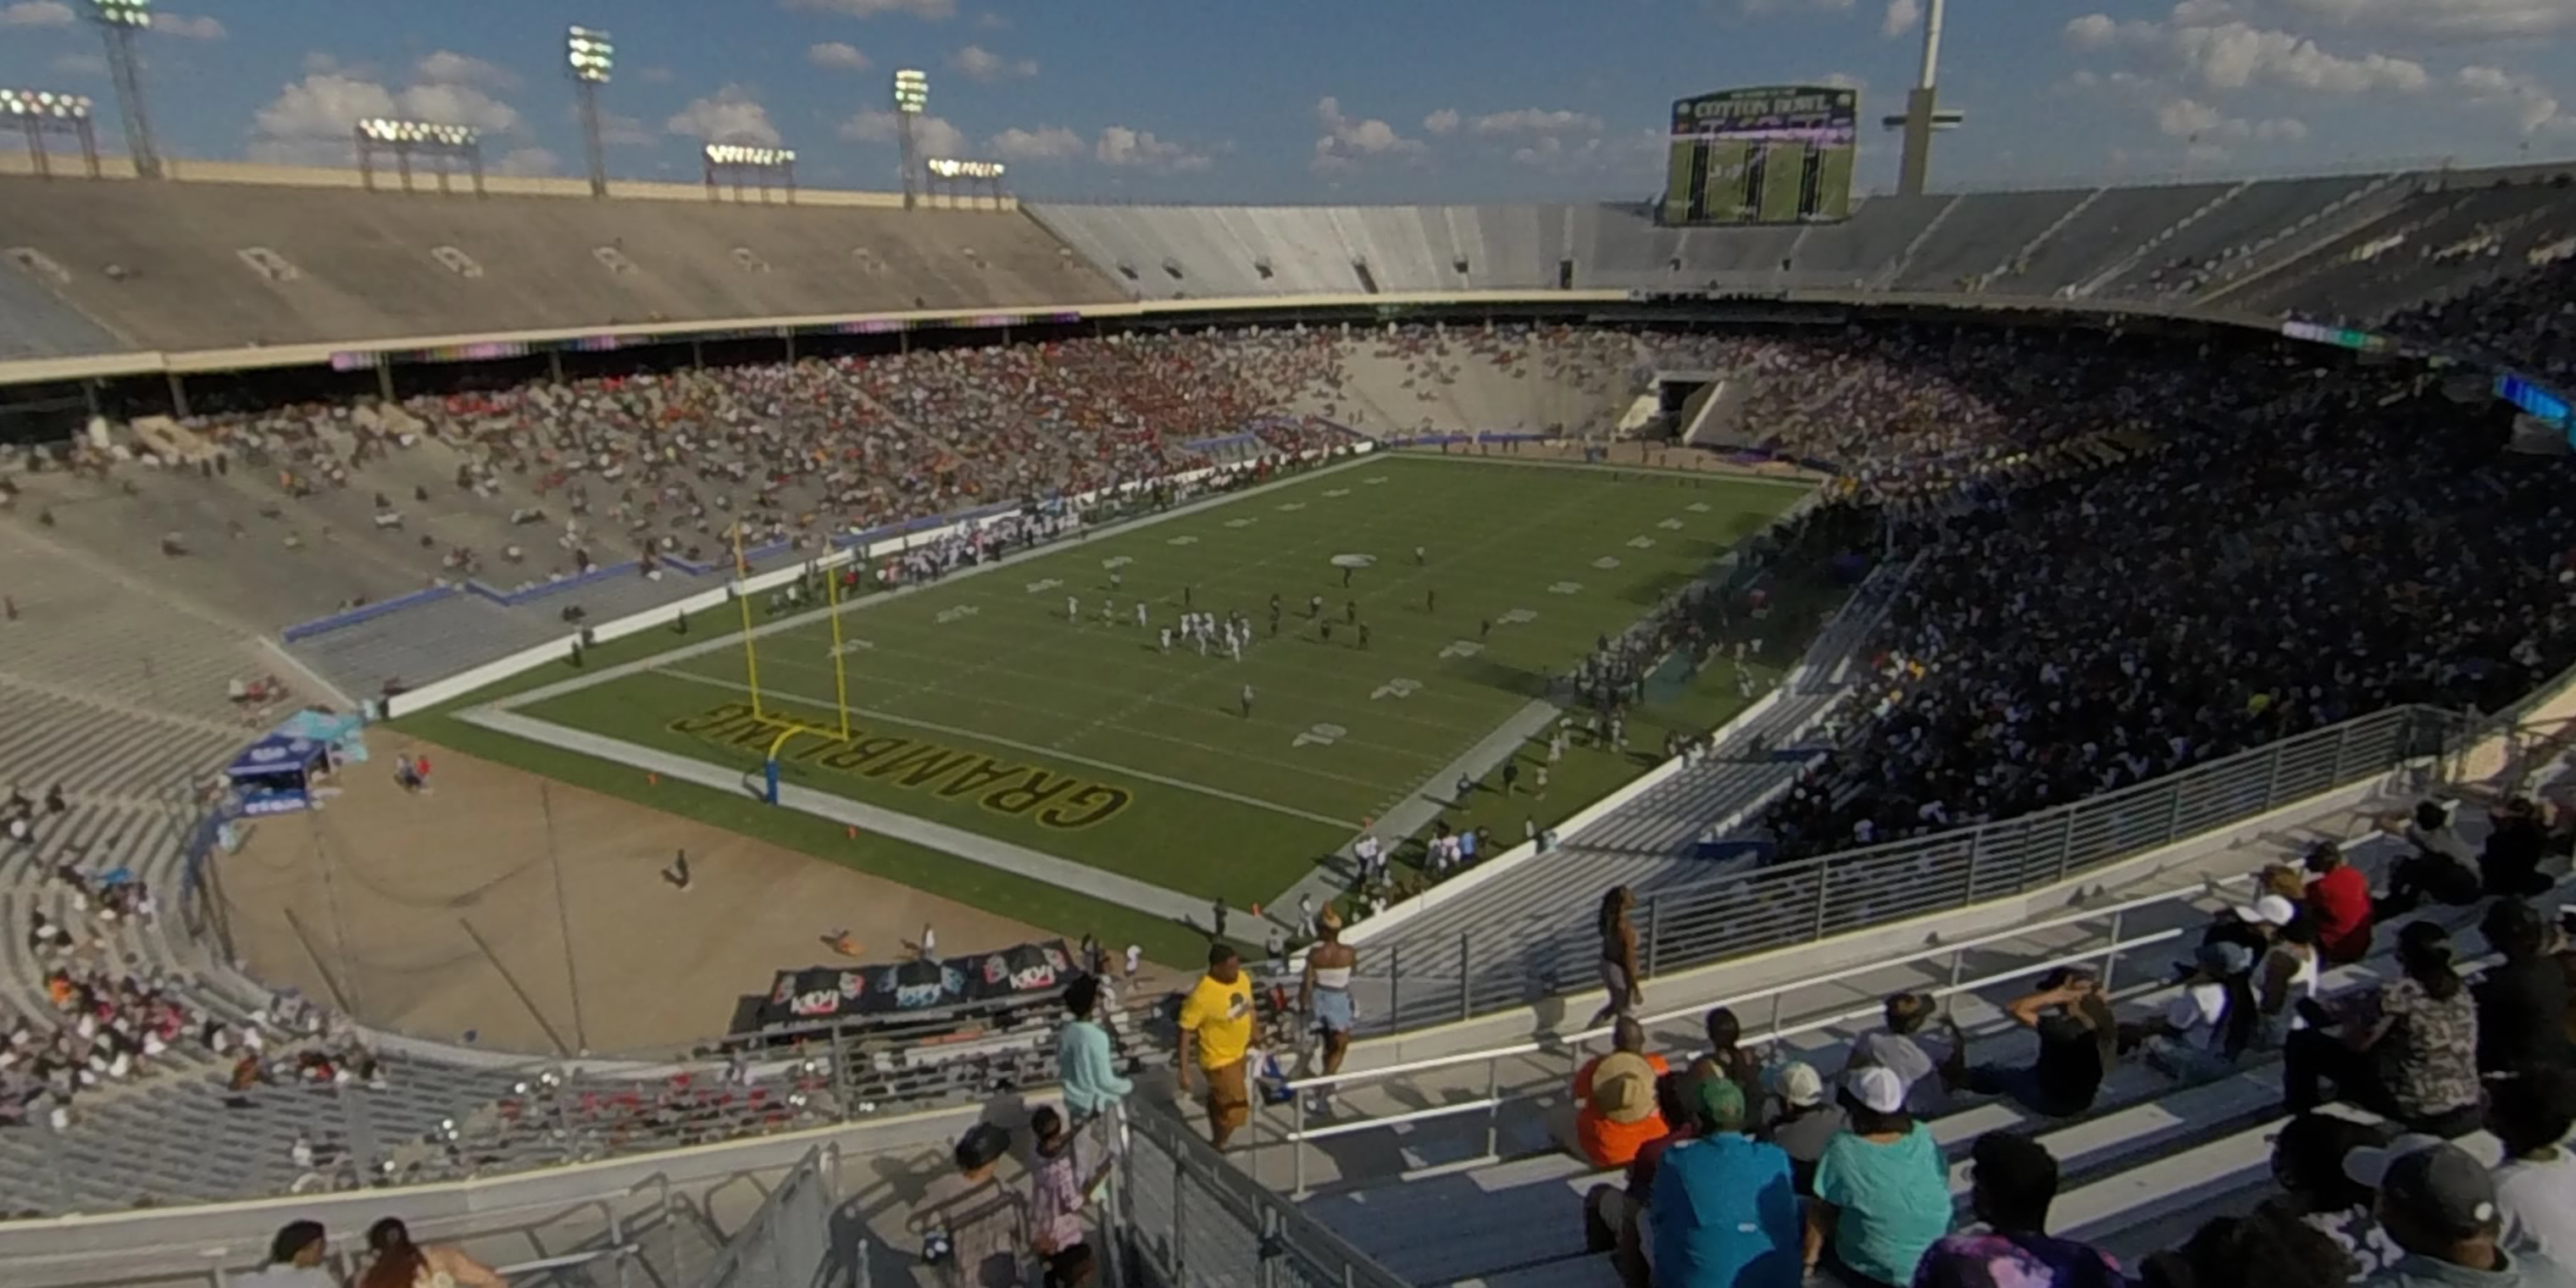 section 113 panoramic seat view  - cotton bowl